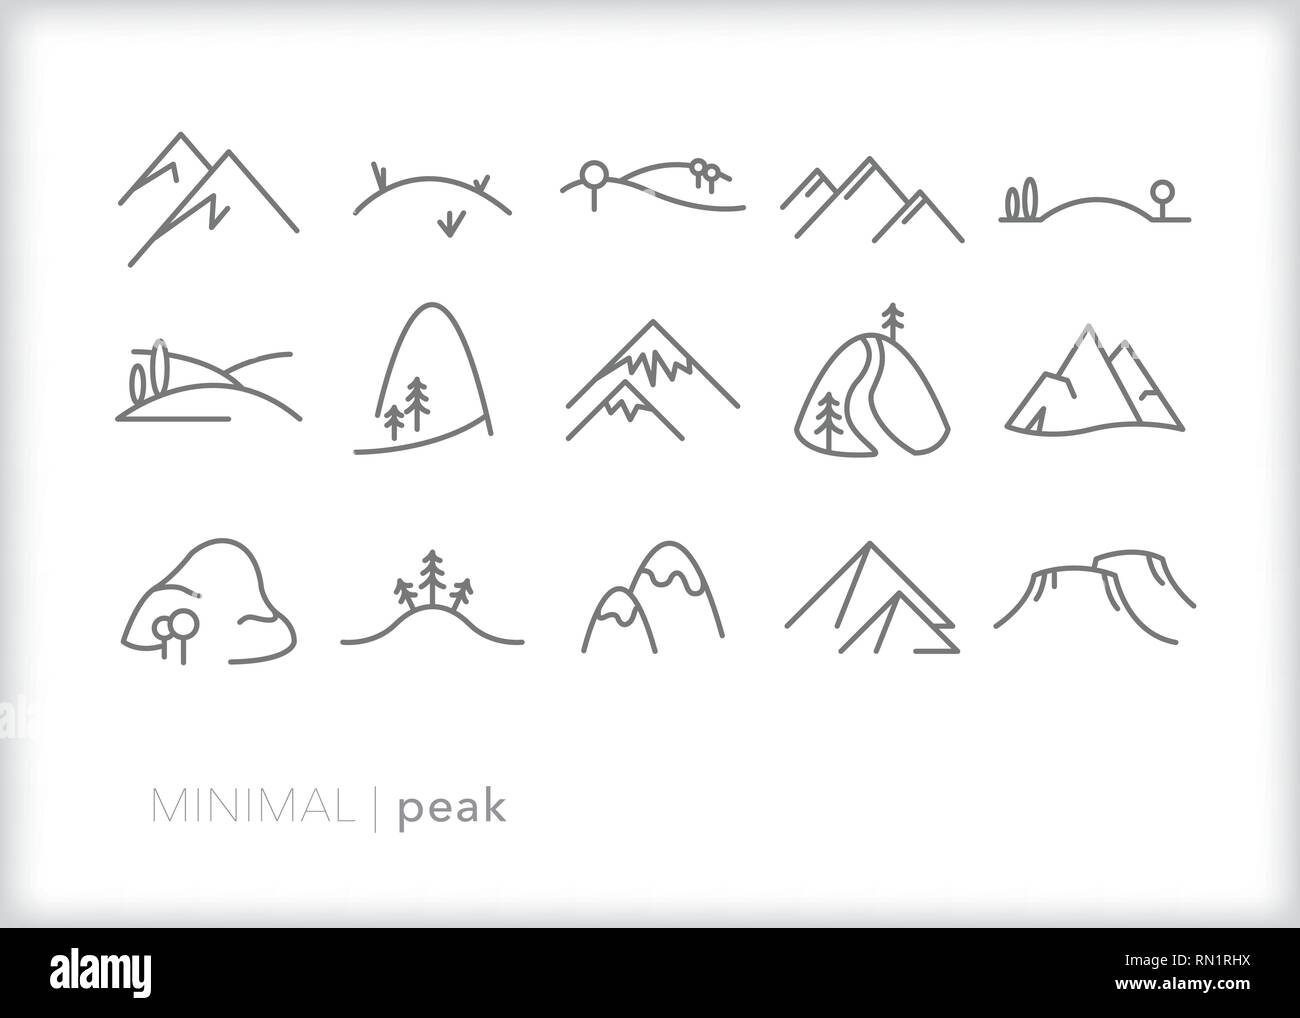 Set of 15 gray mountain peak line icons showing various types of landscapes and vistas including snow-capped mountains, hills, pyramids and rocks Stock Vector